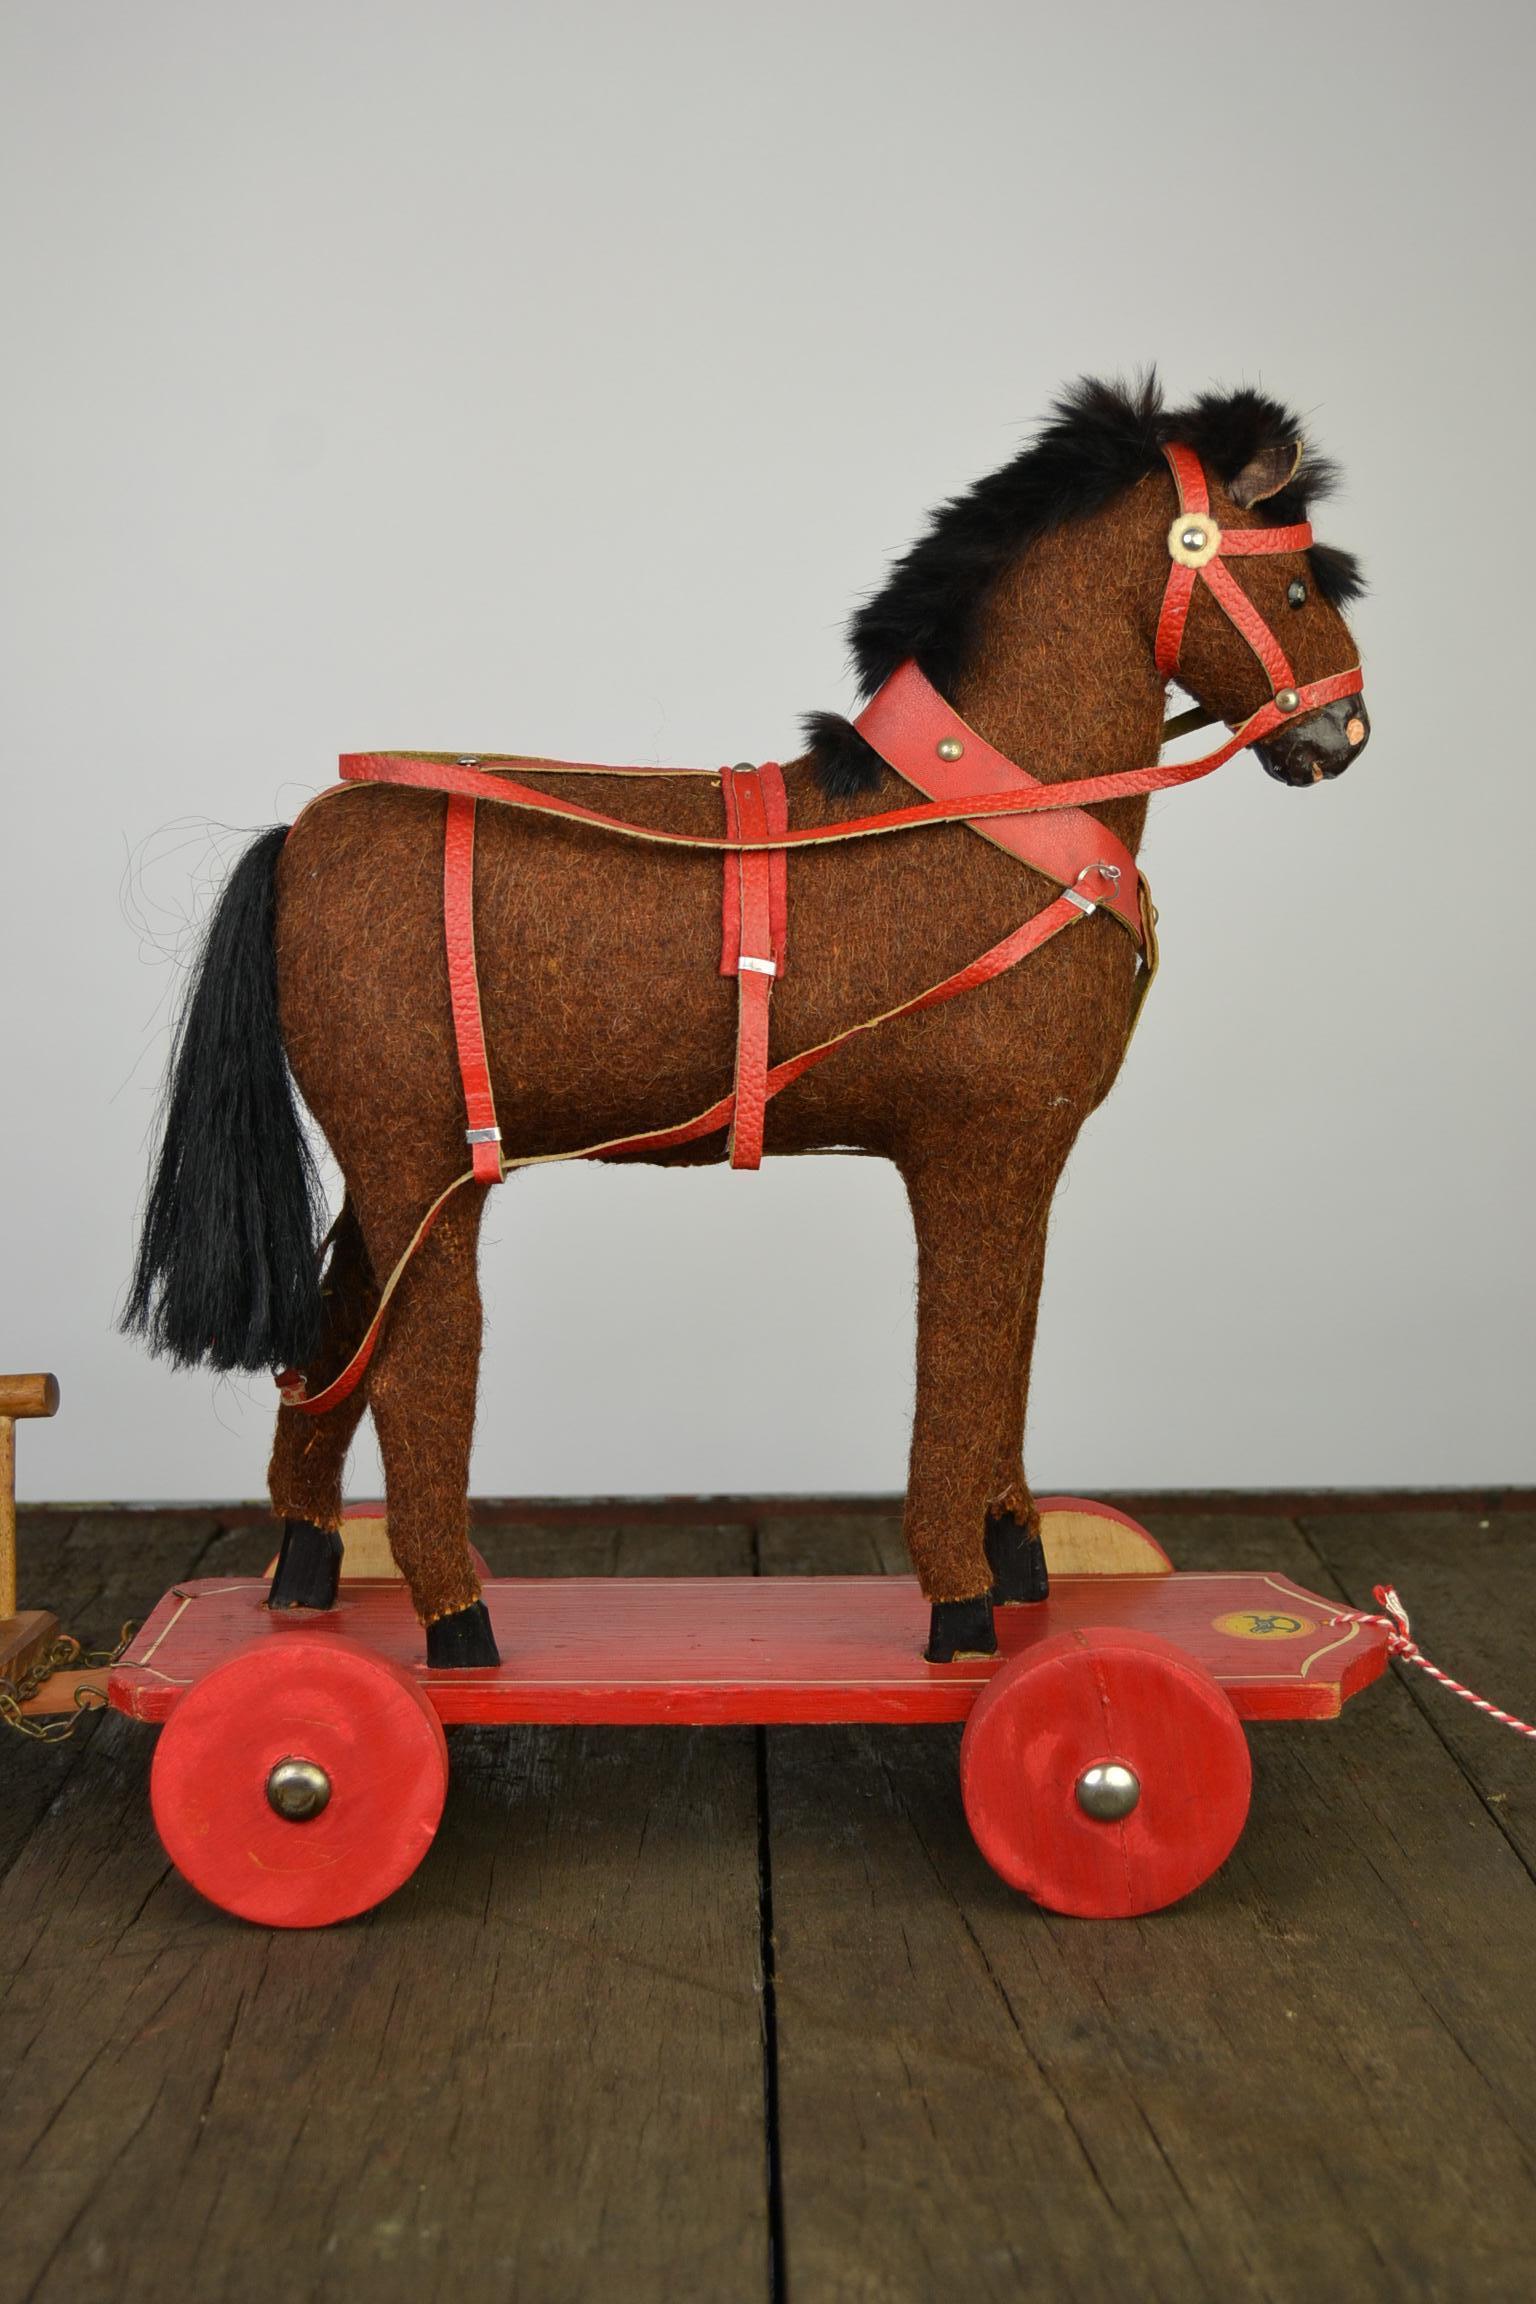 Beautiful antique German Roy,
a pull toy, a pull horse toy with cart.
This antique toy horse, circa 1930s, is mounted on a wooden platform with wheels. The carved wood horse is covered with brown burlap.
The hooves and snout are hand carved and